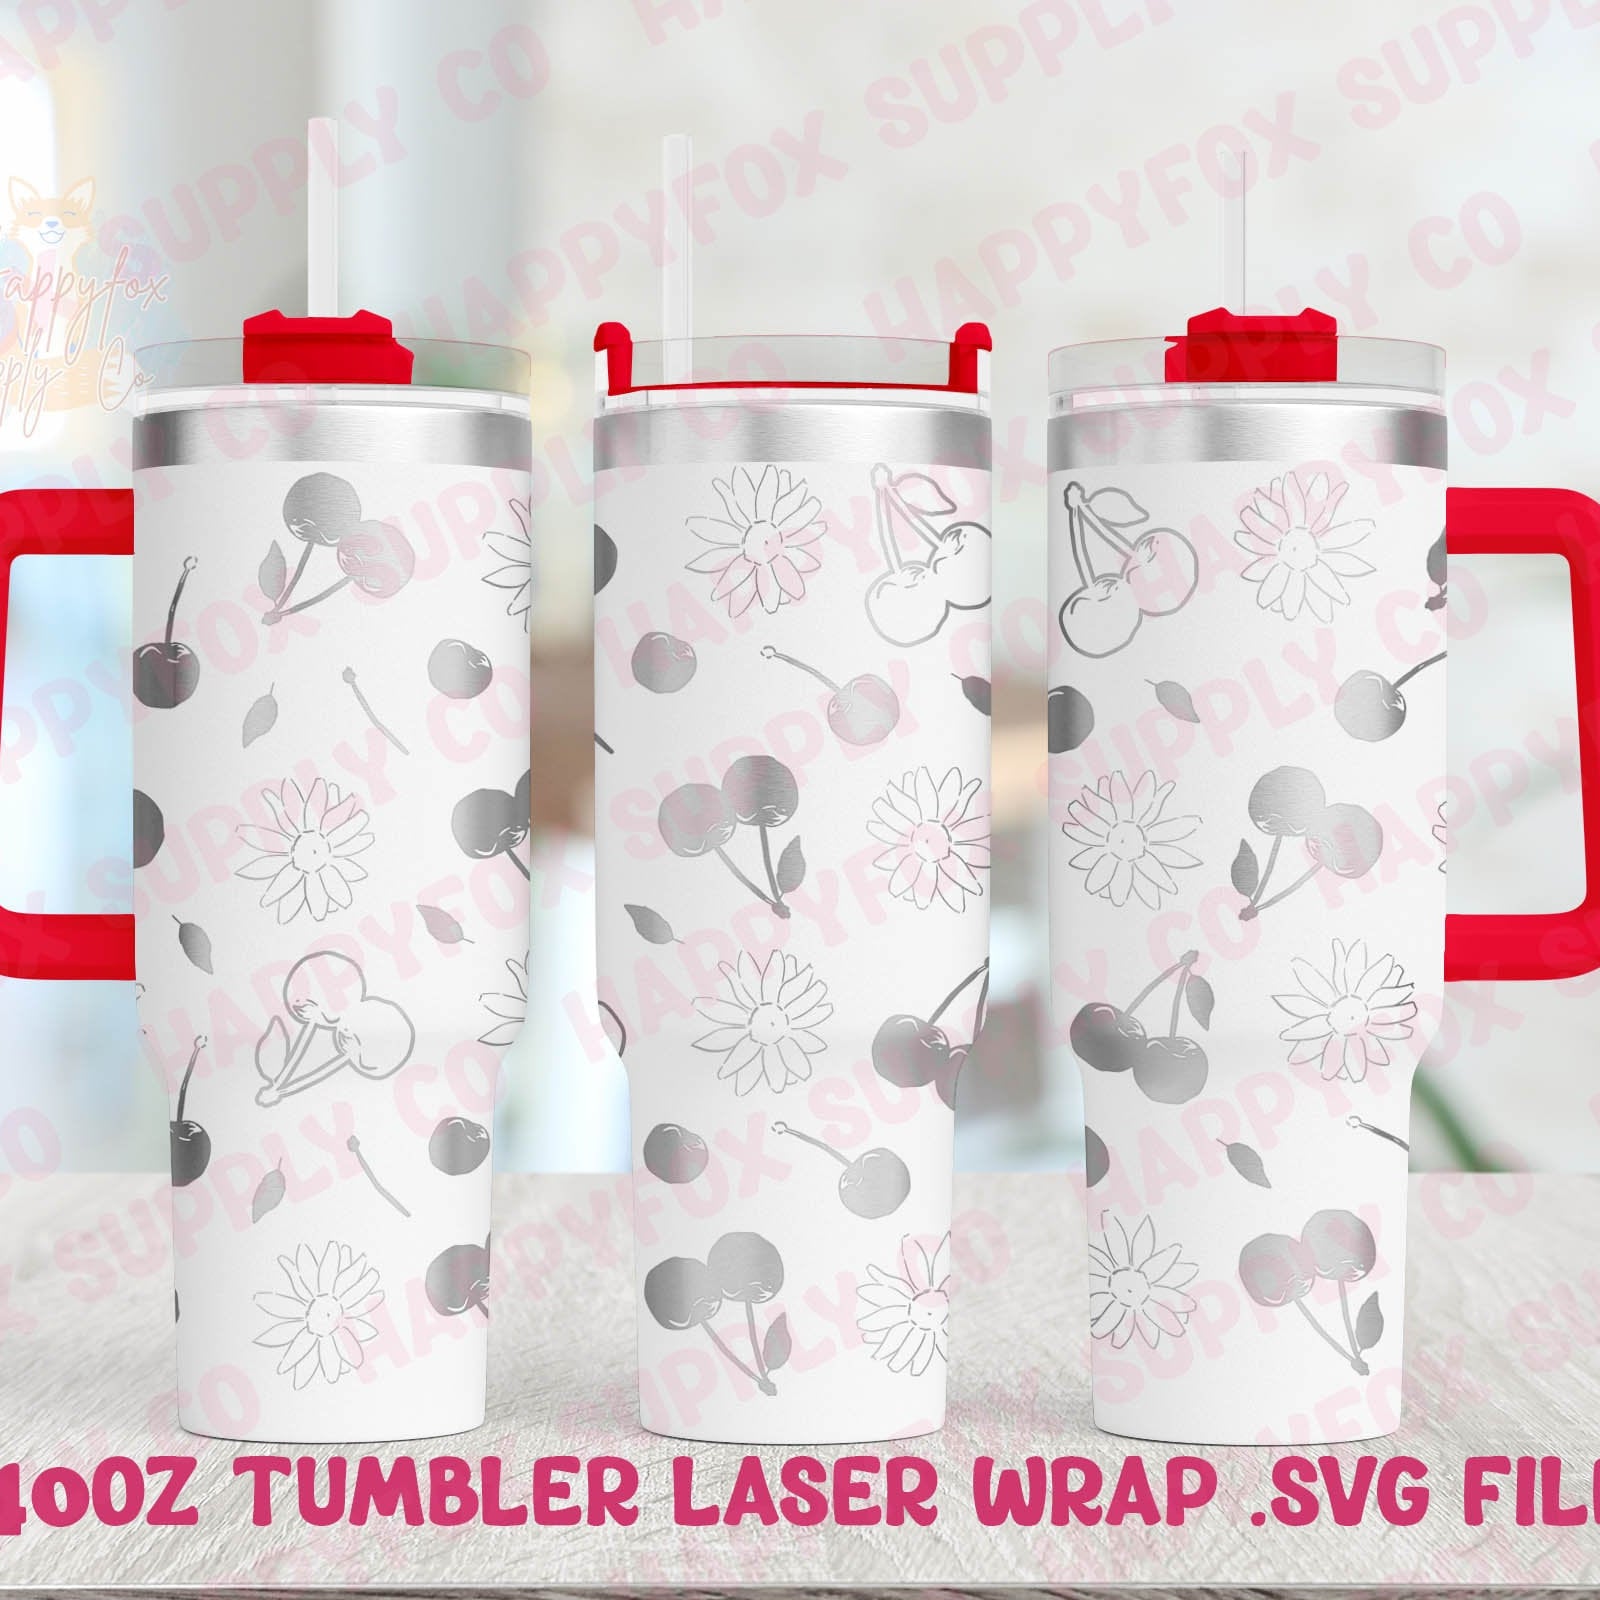 40oz Engraving .SVG File for Lasers Laser Engraved Tumbler Wrap Cherries Flowers Daisies Retro Spring Cute .SVG Tumbler Wrap